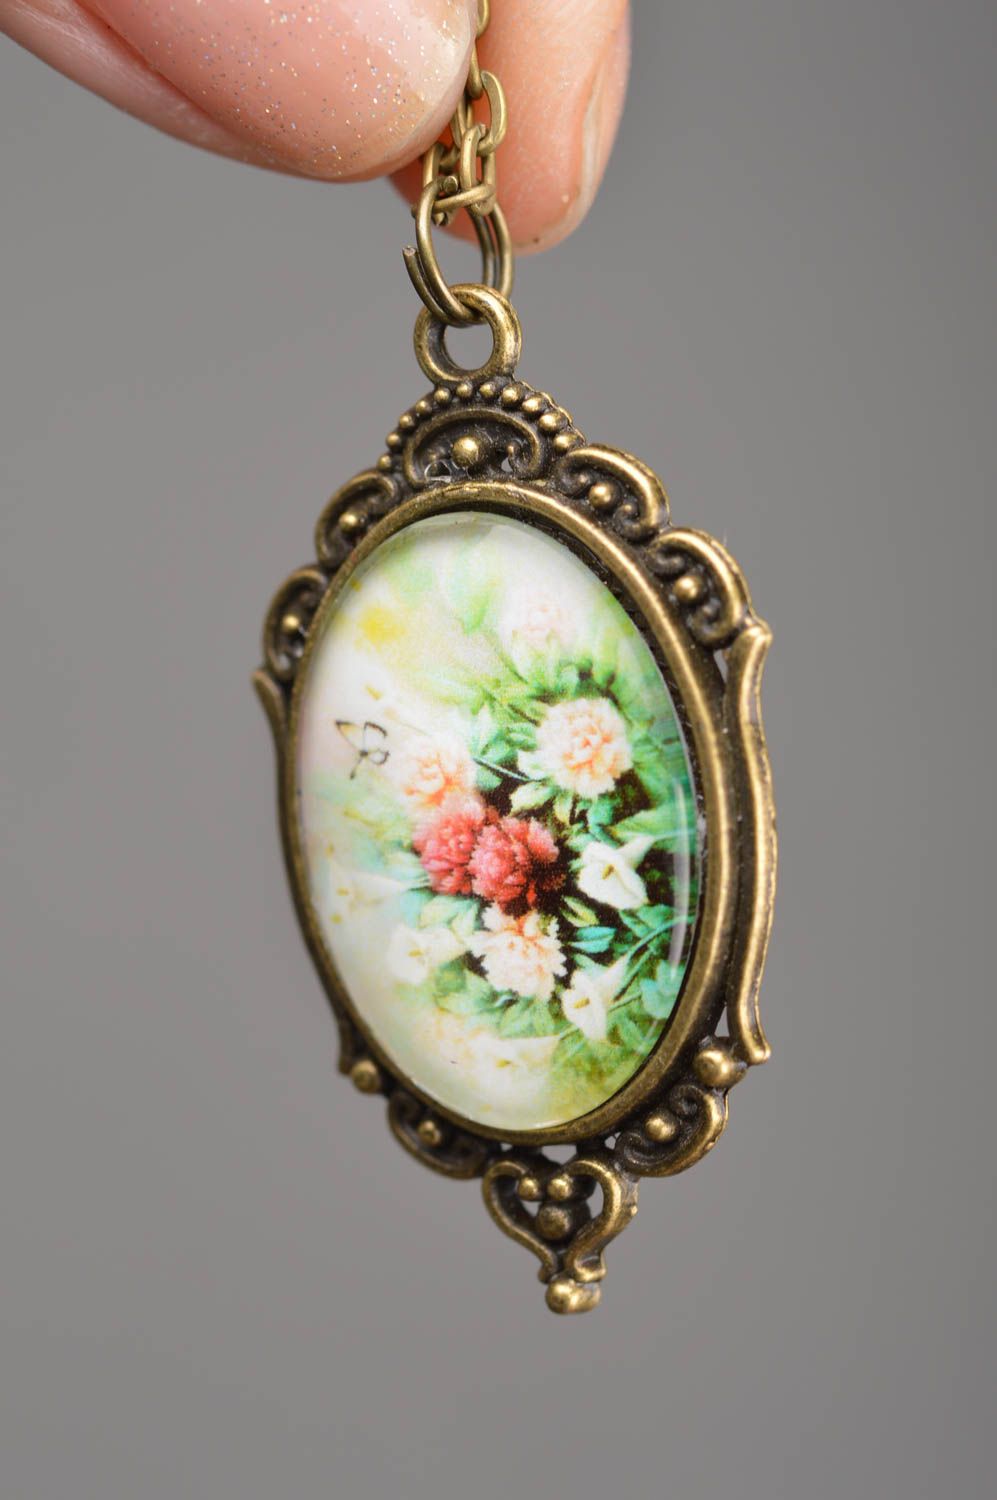 Handmade cute oval pendant on long chain with flowers in vintage style photo 3